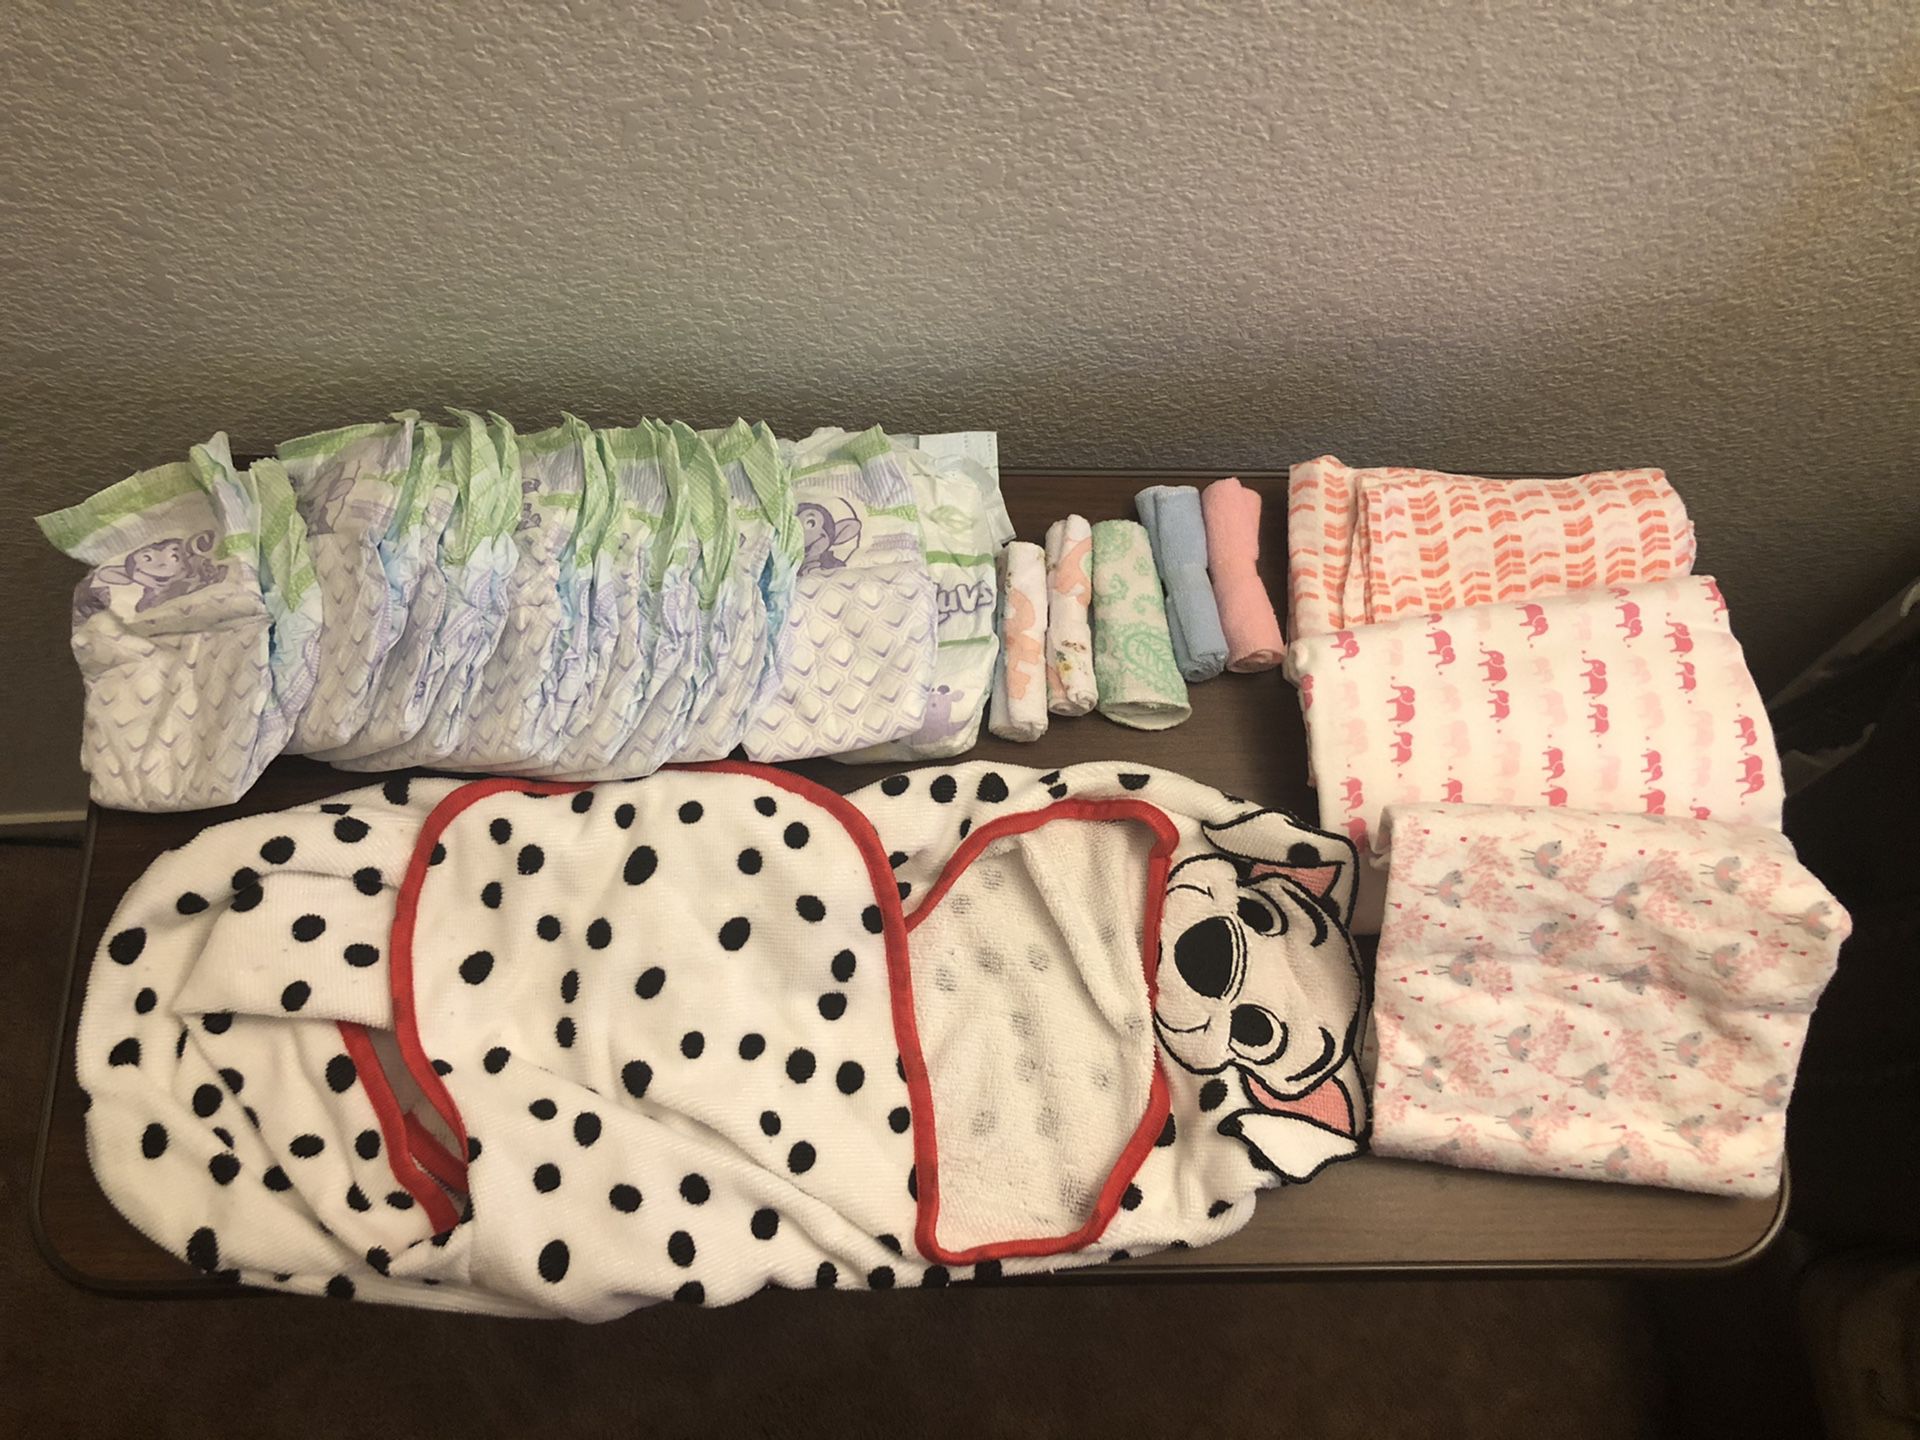 Baby girl infant and toddler clothes size preemie to 12 months and diapers size 1